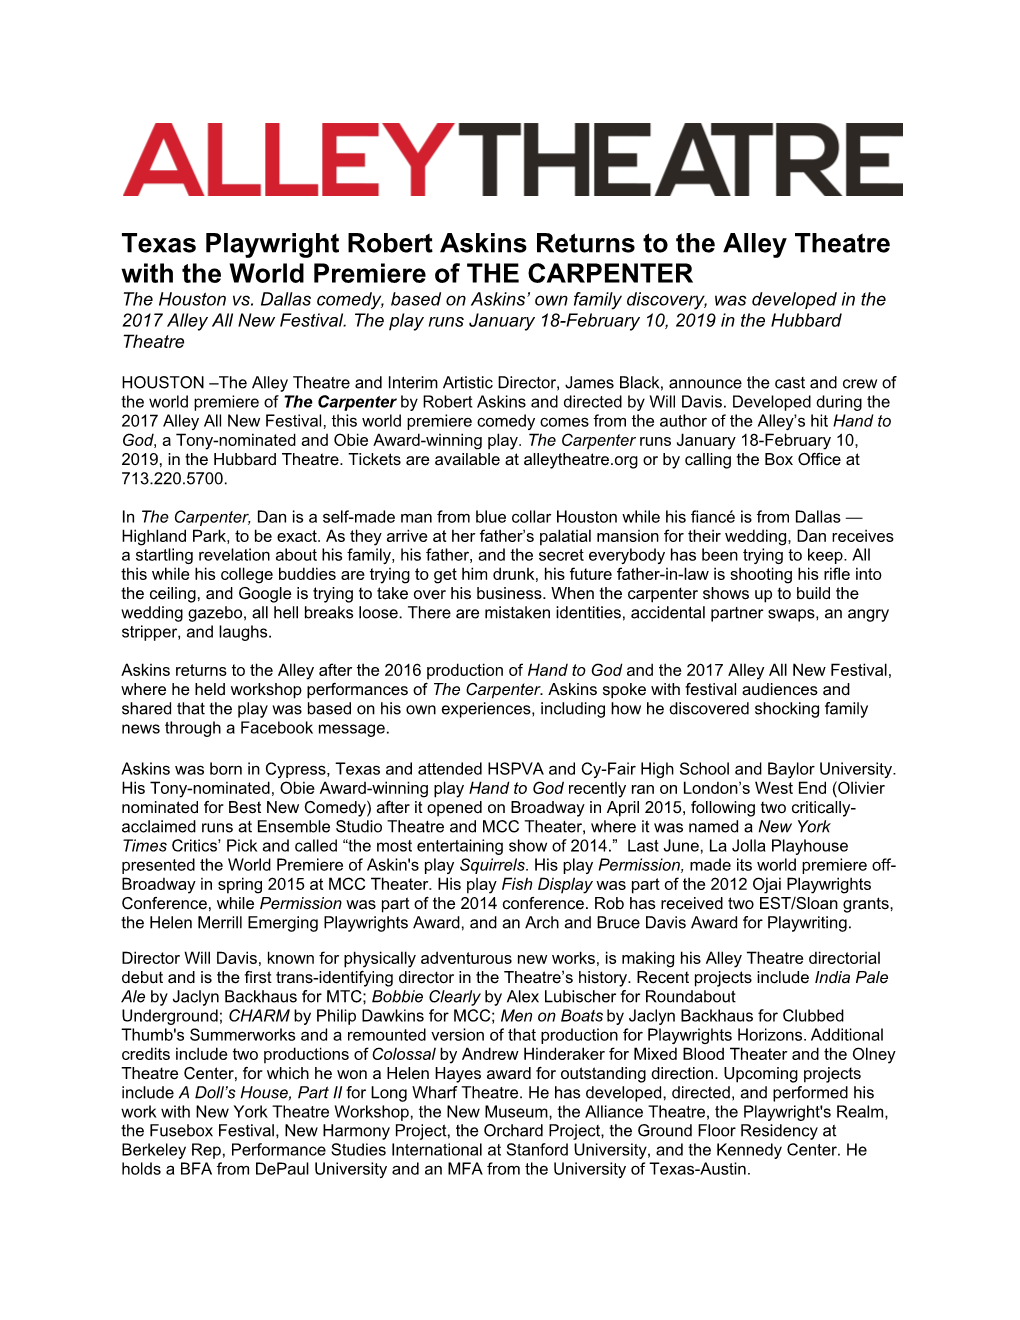 Texas Playwright Robert Askins Returns to the Alley Theatre with the World Premiere of the CARPENTER the Houston Vs